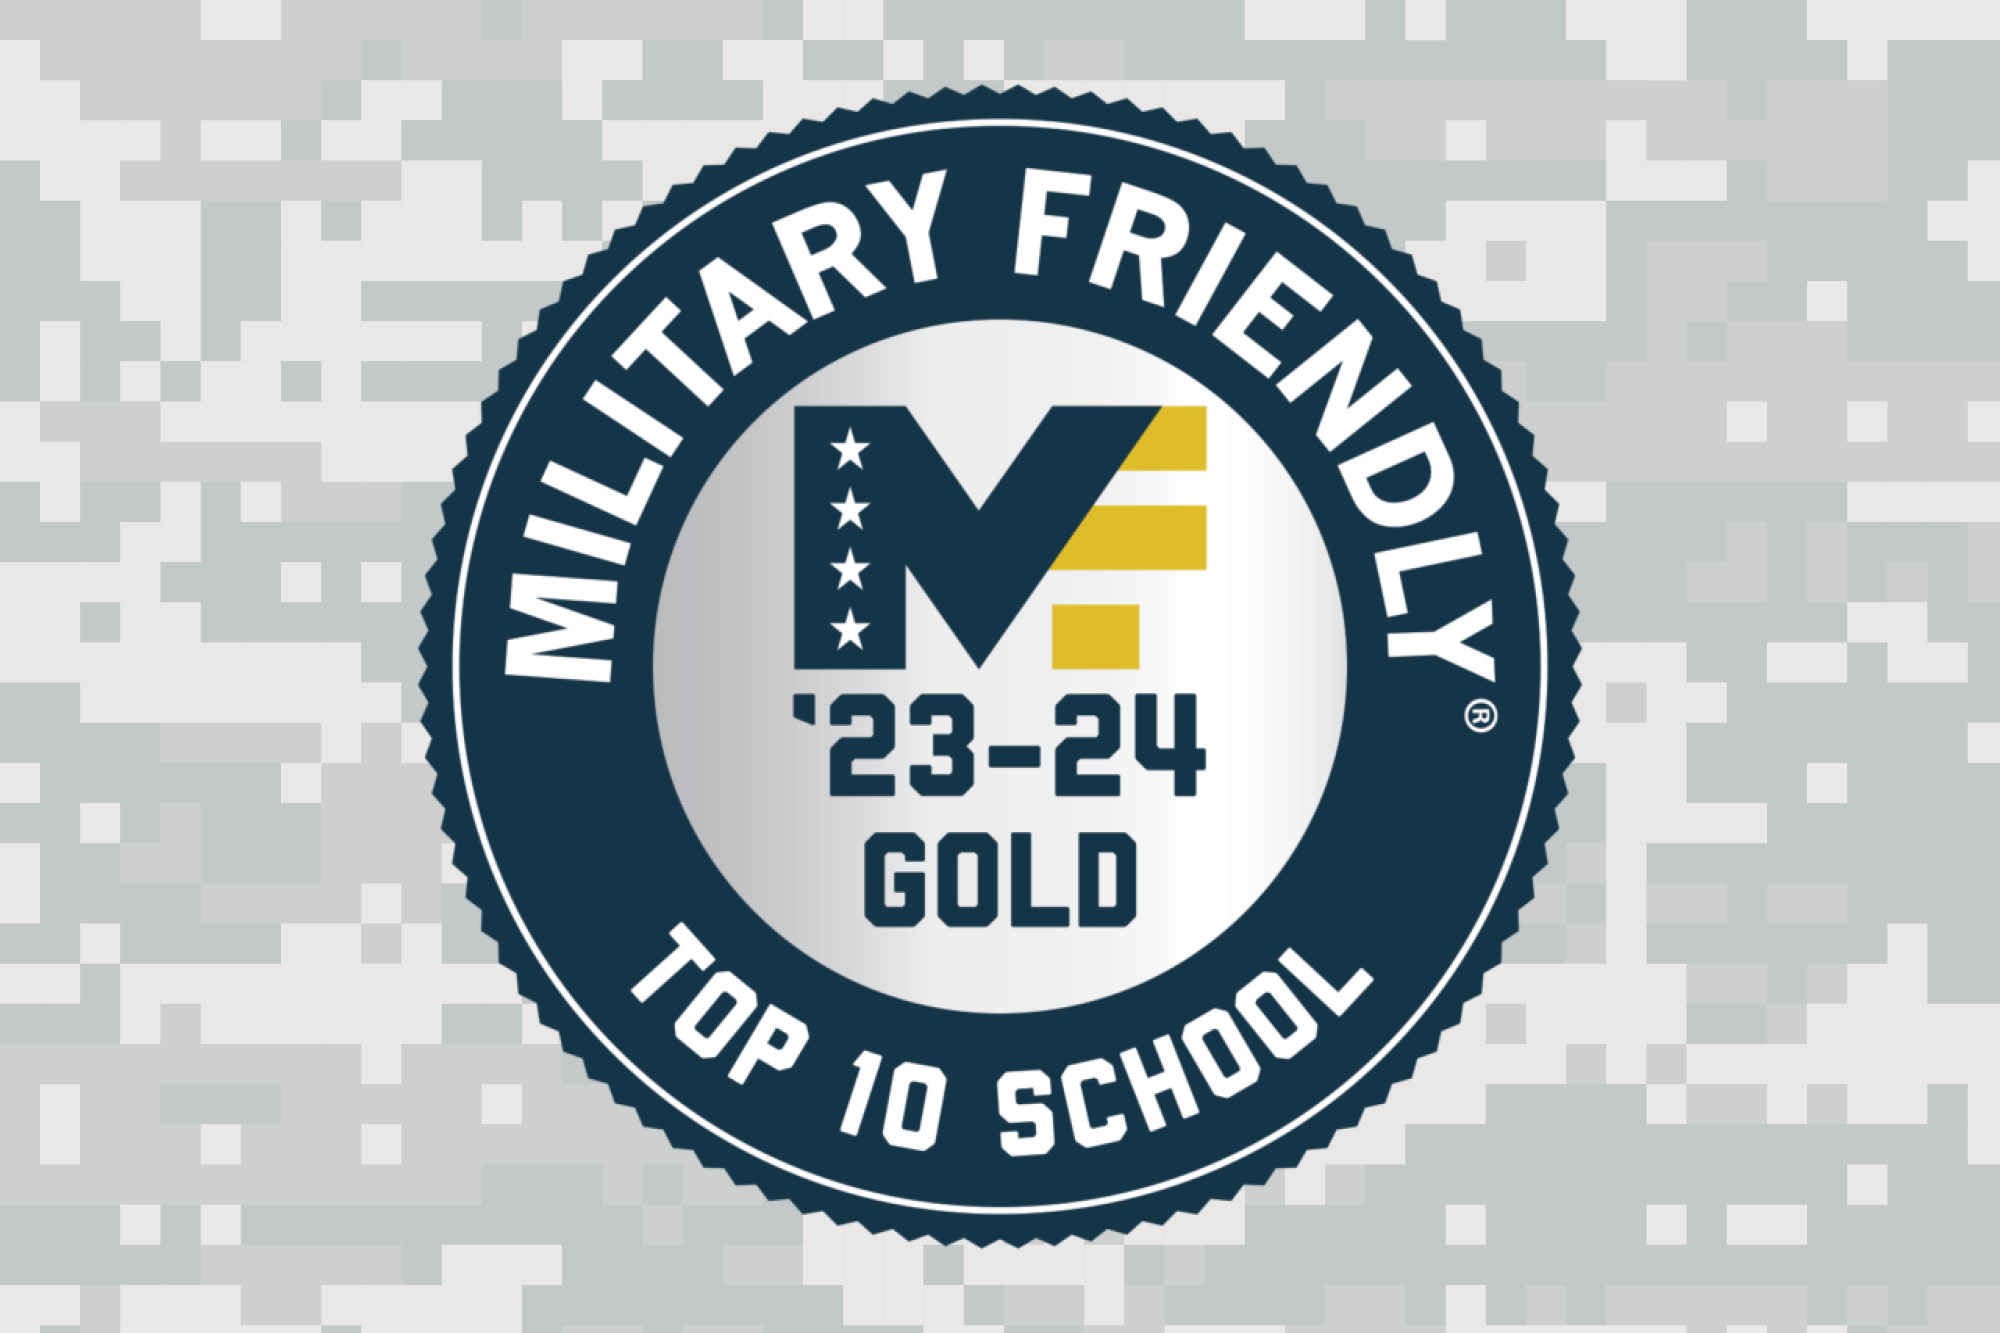 Image for Military Friendly Top 10 School press release.